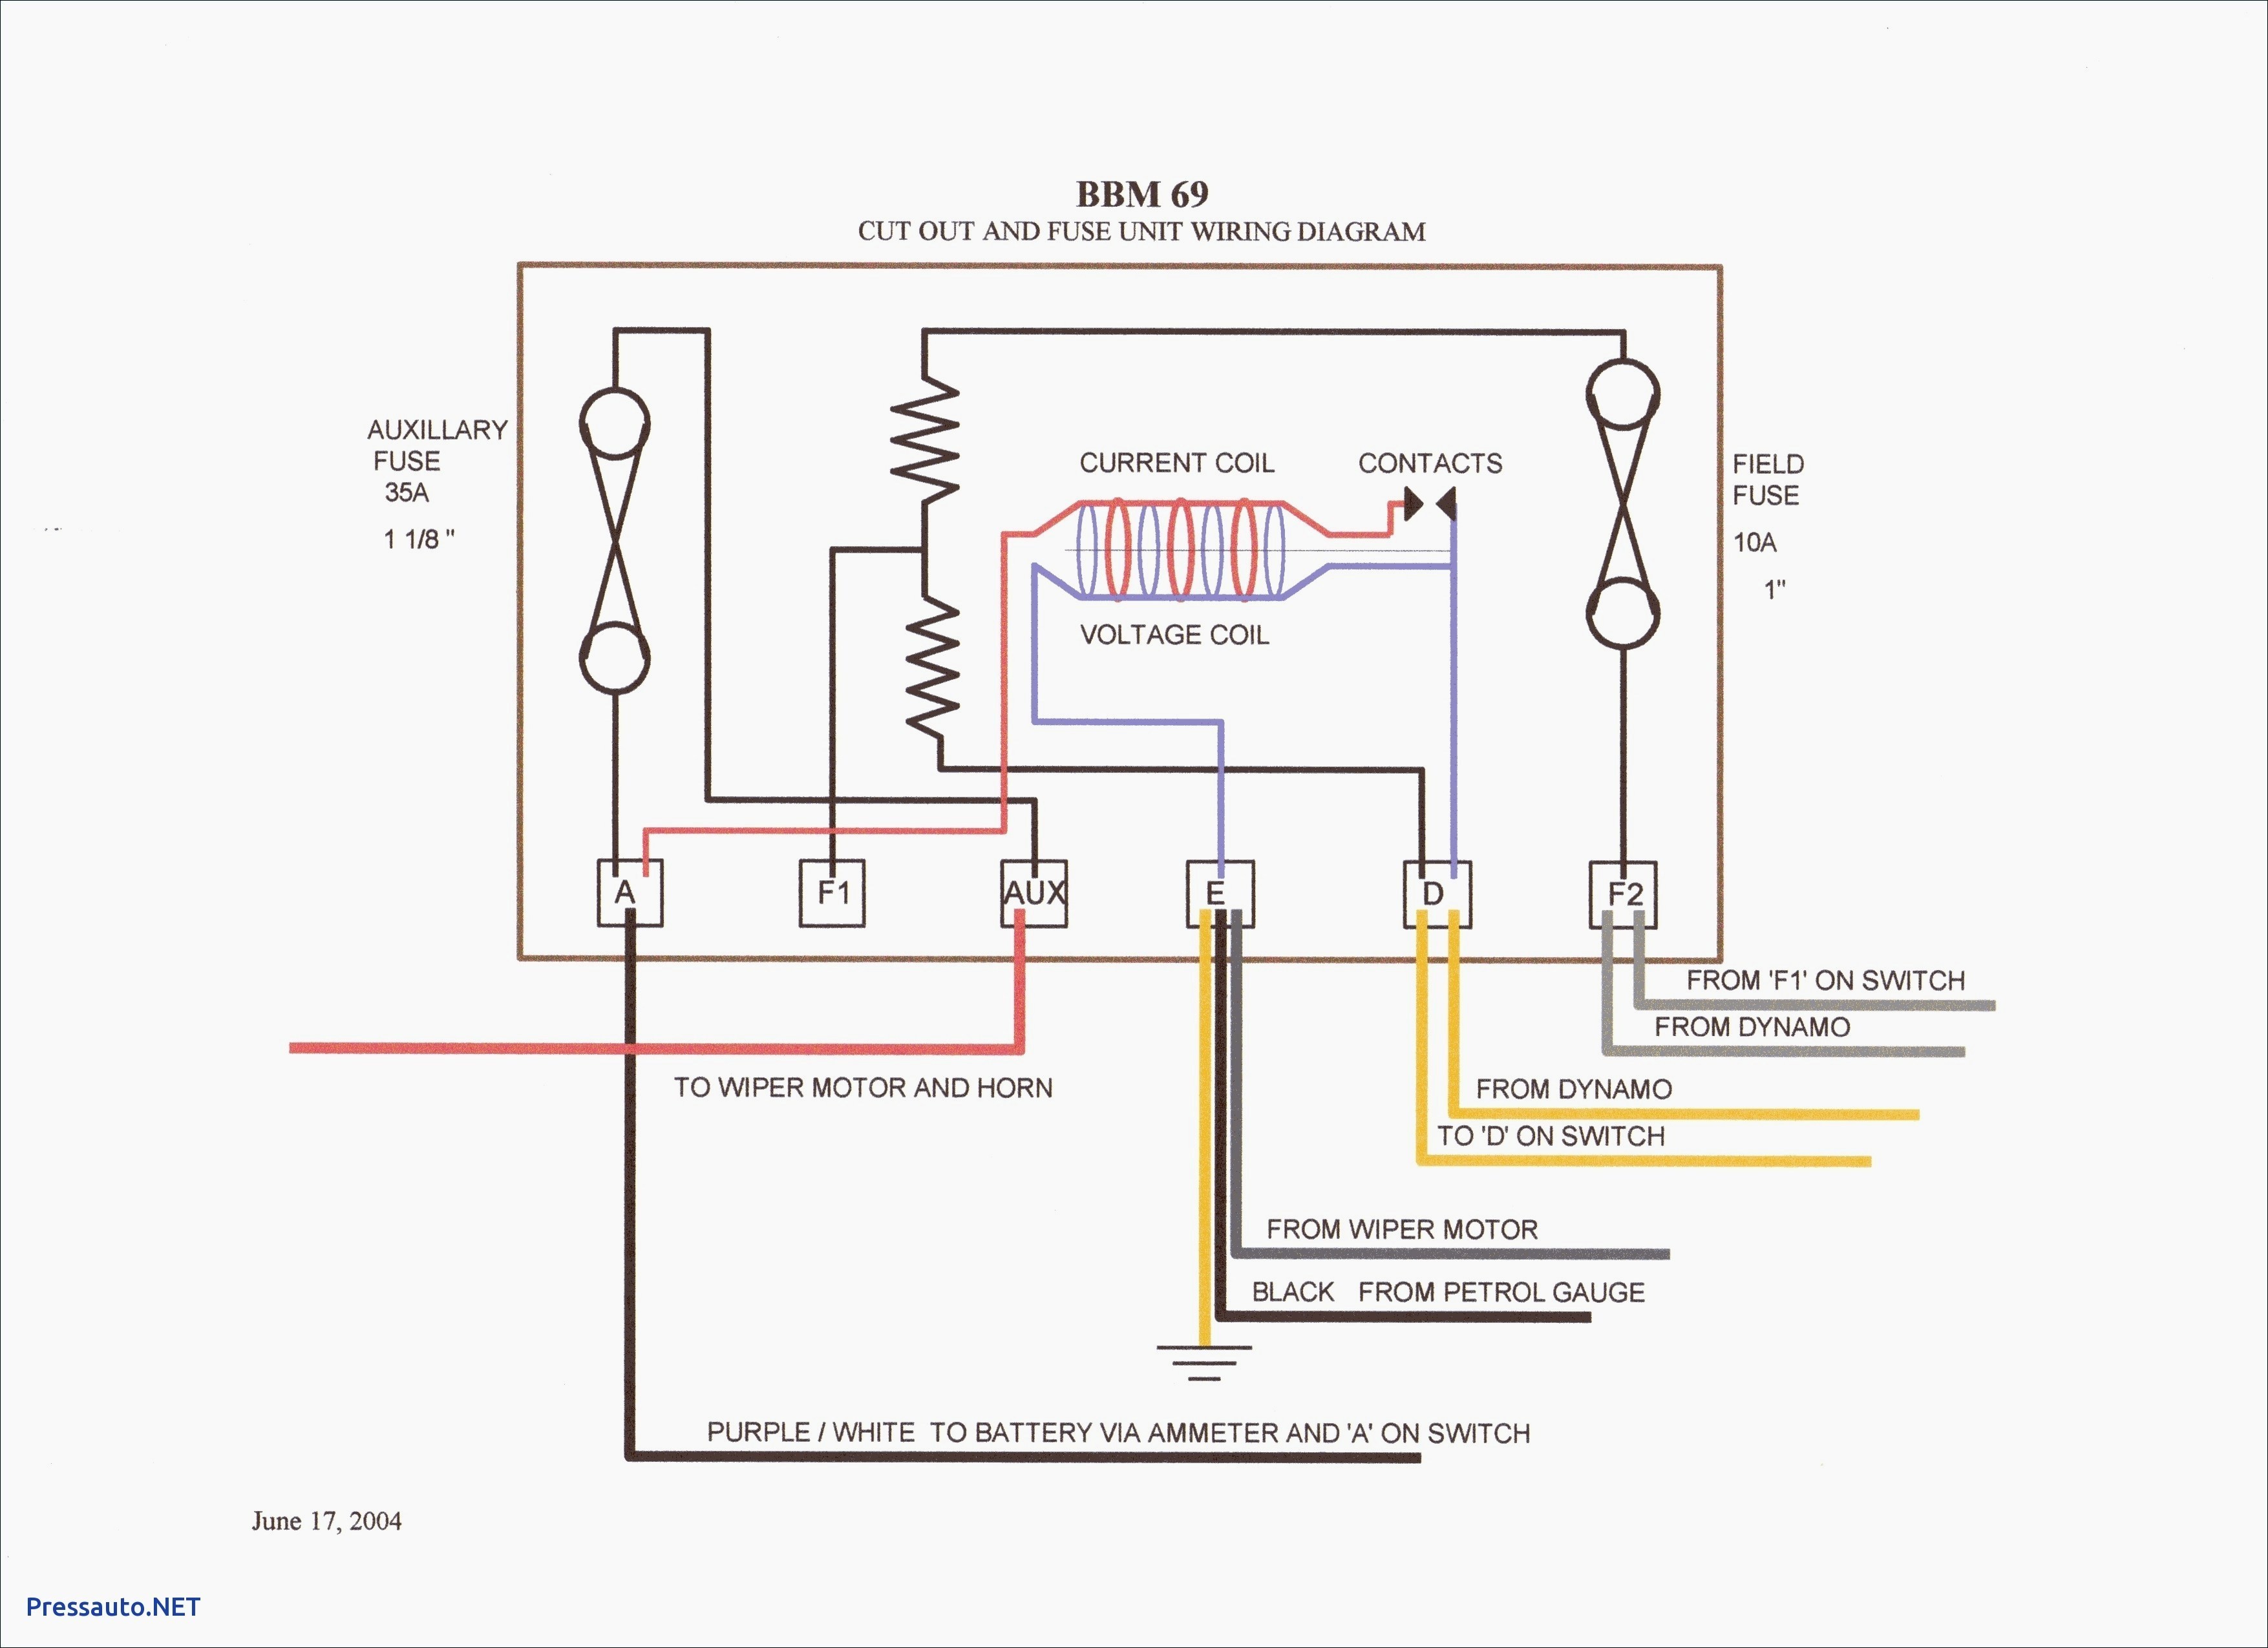 Wiring Diagram Electric Water Heater New Electric Water Heater thermostat Wiring Diagram